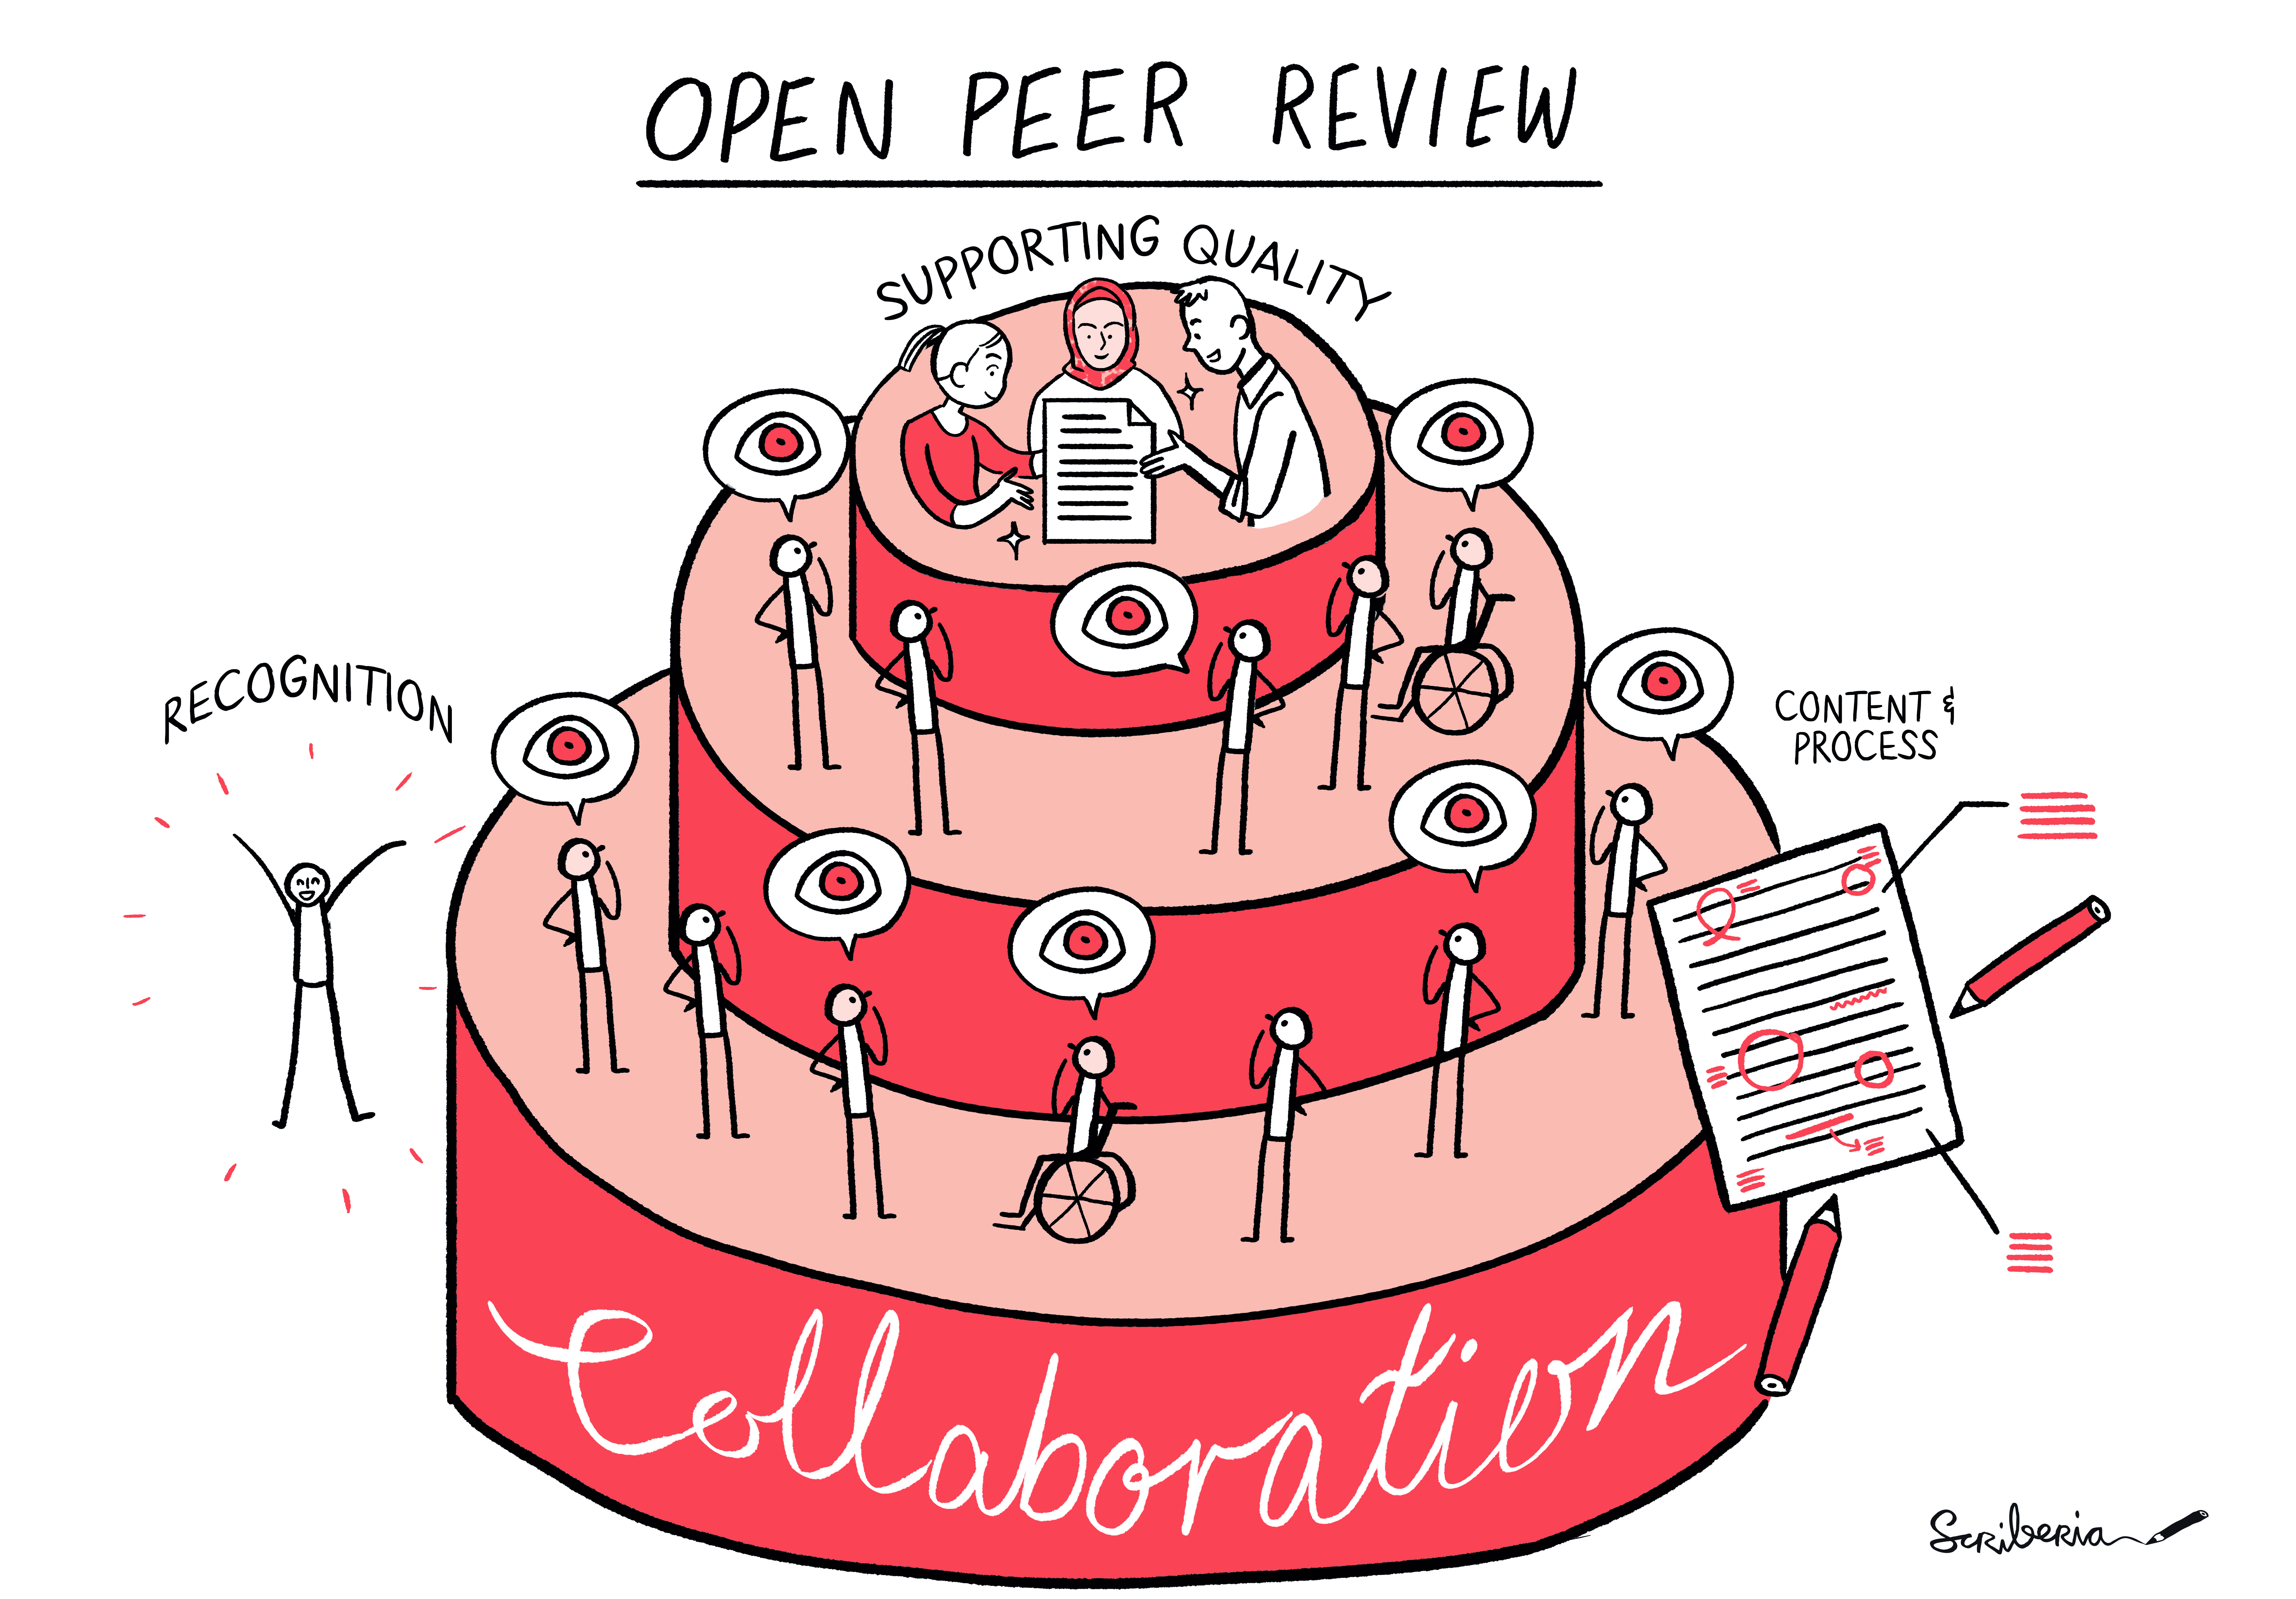 Cartoon-like sketch, in black and white with orange shading, of a three tiered cake with the title Open Peer Review at the top. On the bottom level of the cake is the word collaboration with different types of people standing on this level of the cake looking thoughtful. Each person has a speech bubble over them with an eye in it. There are more thoughtful people standing on the second tier and the third and top tier has three people holding a written document with the words supporting quality over them. At the side of the cake are the words recognition, on the left side, and content and process, on the right side.